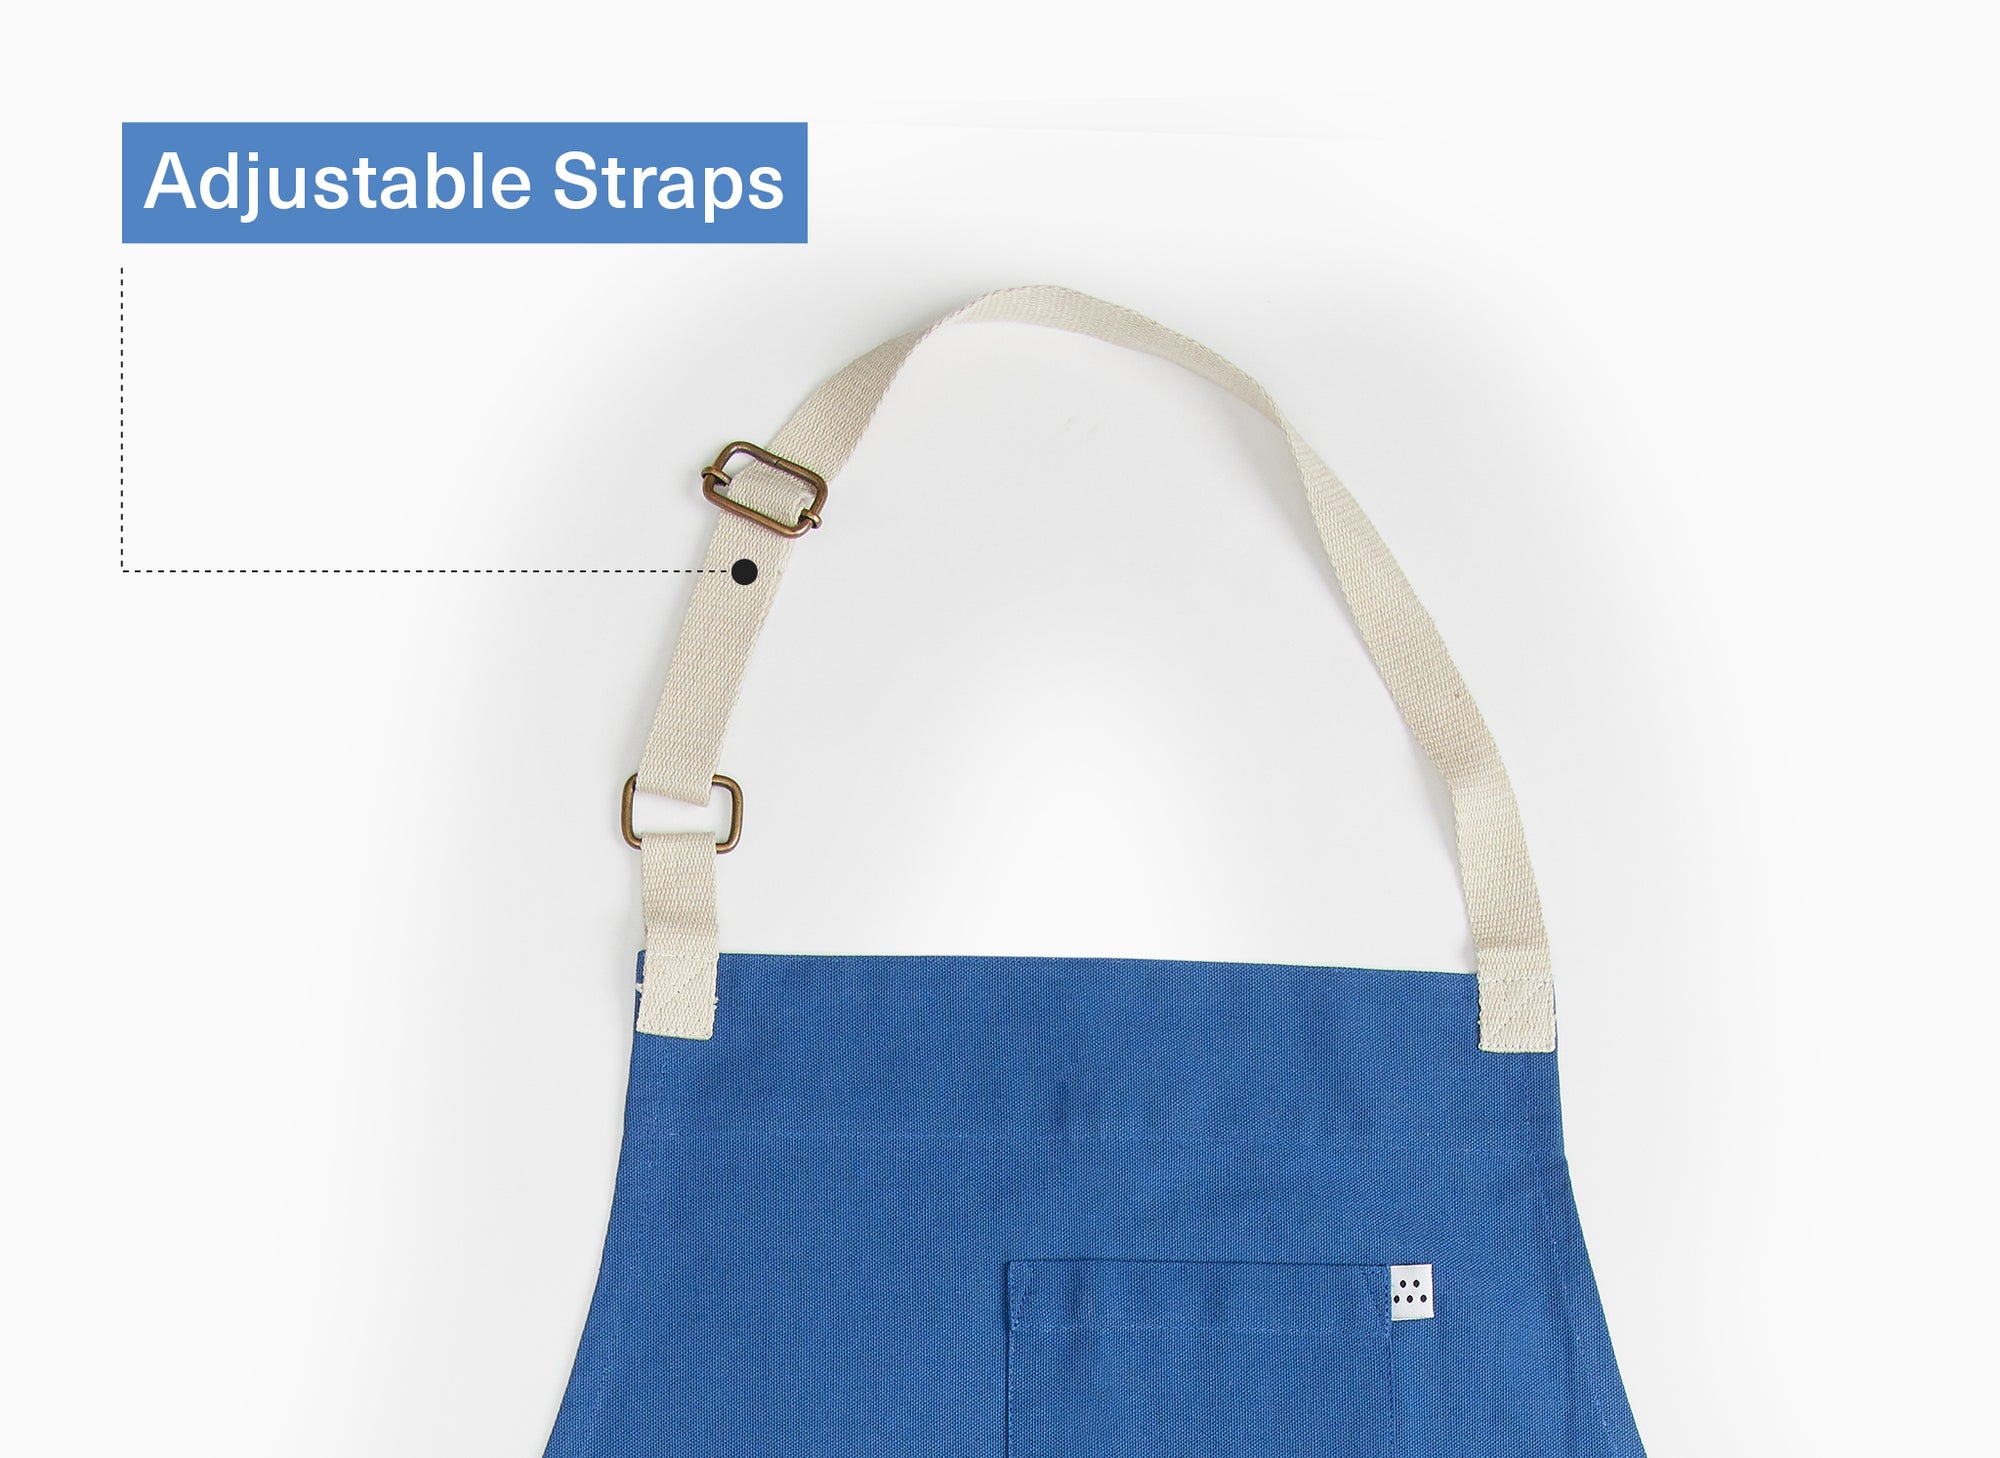 The top quarter of a blue Misen Apron lies flat on a white background. Graphics on the image say “Adjustable Straps.”